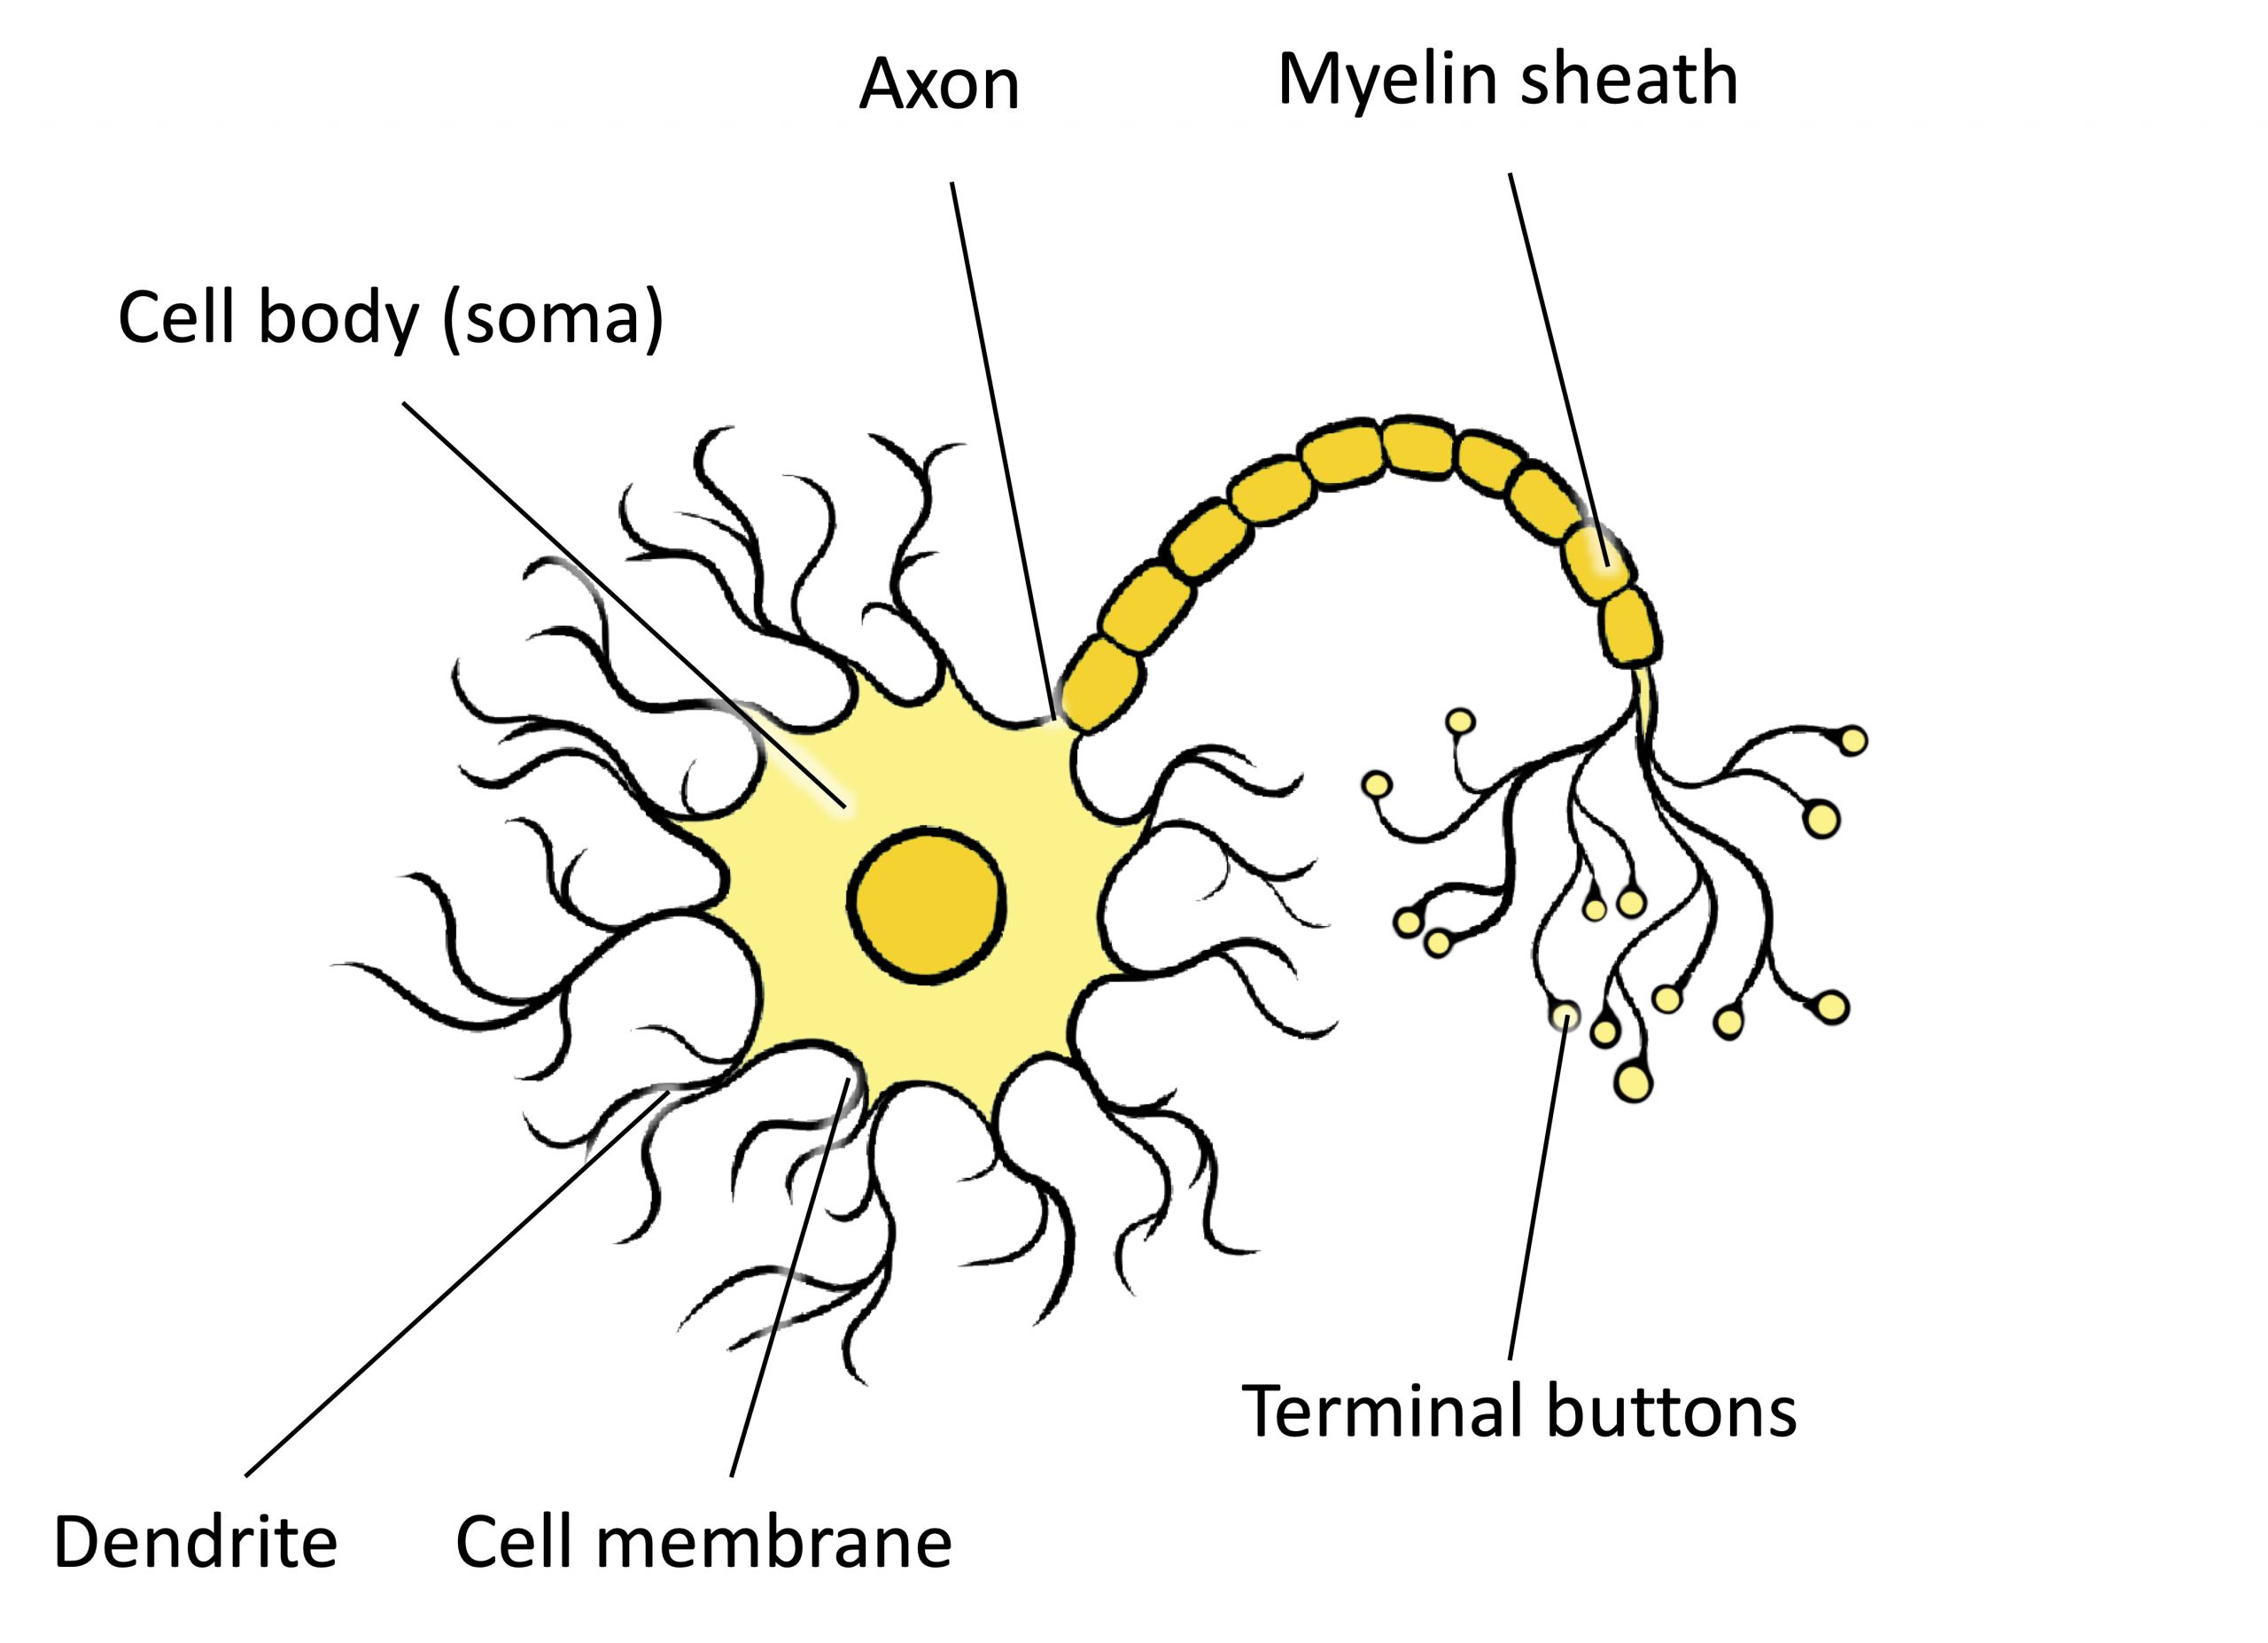 An illustration shows a neuron with labeled parts for the cell membrane, dendrite, cell body, axon, and terminal buttons. A myelin sheath covers part of the neuron.